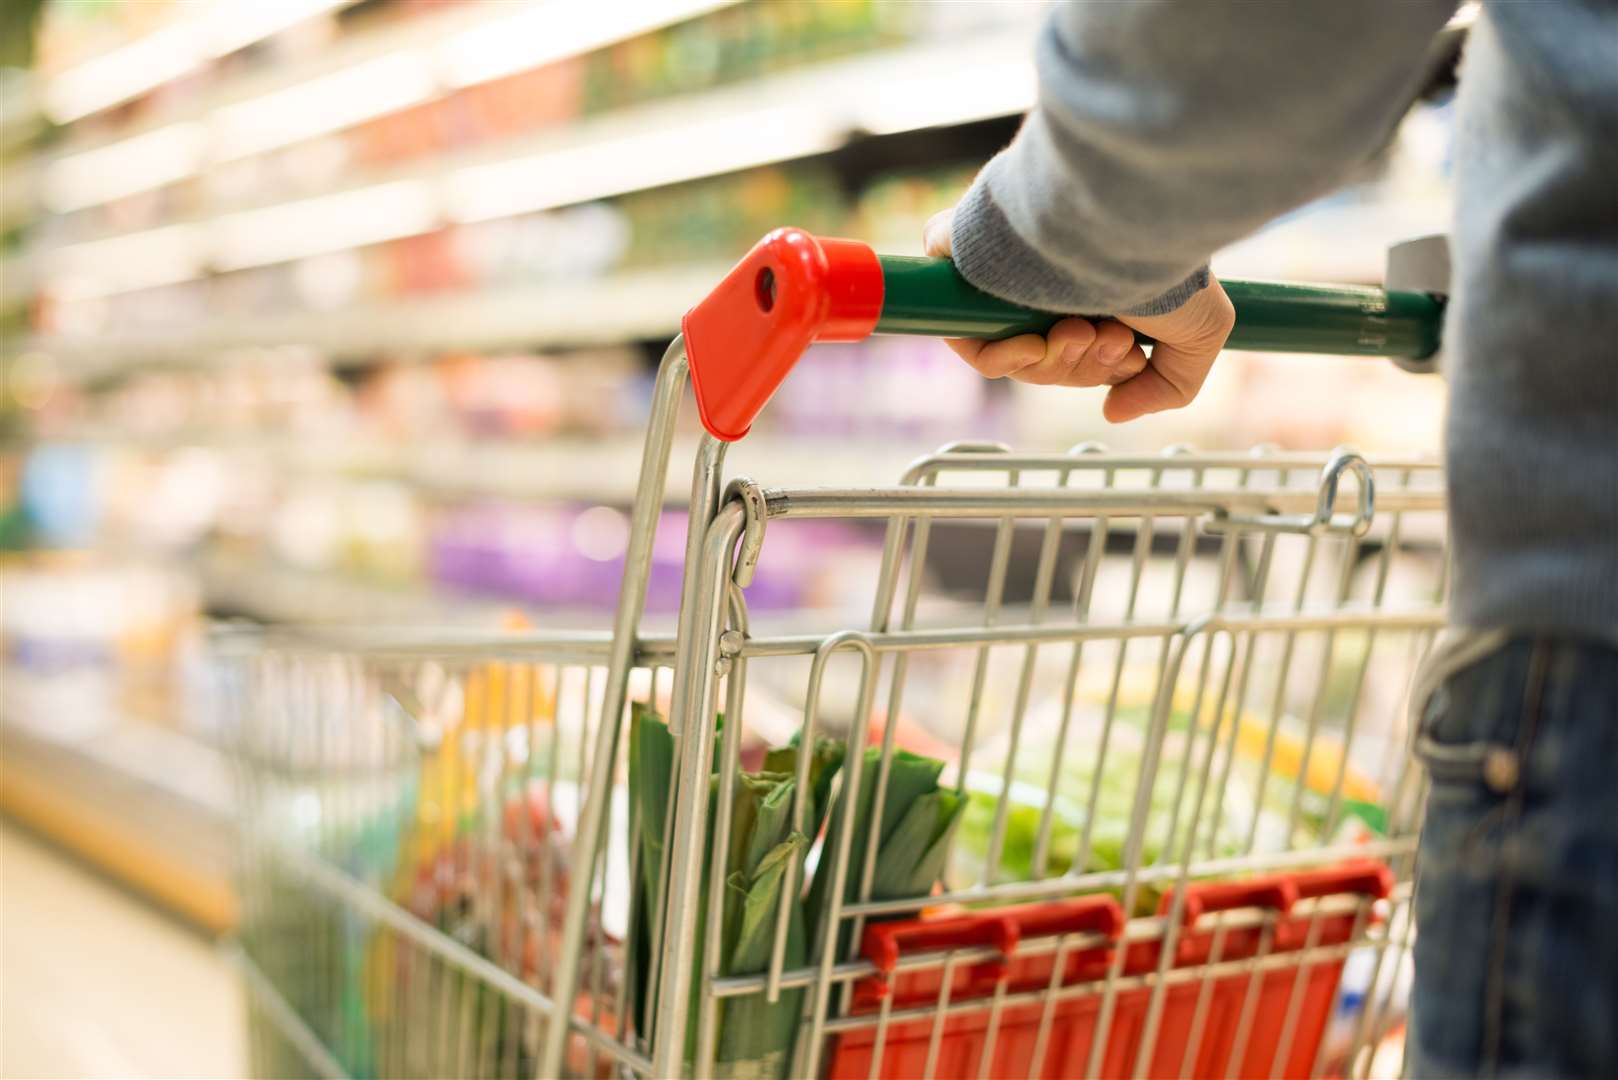 Prices at all supermarkets fluctuated when it came to branded goods